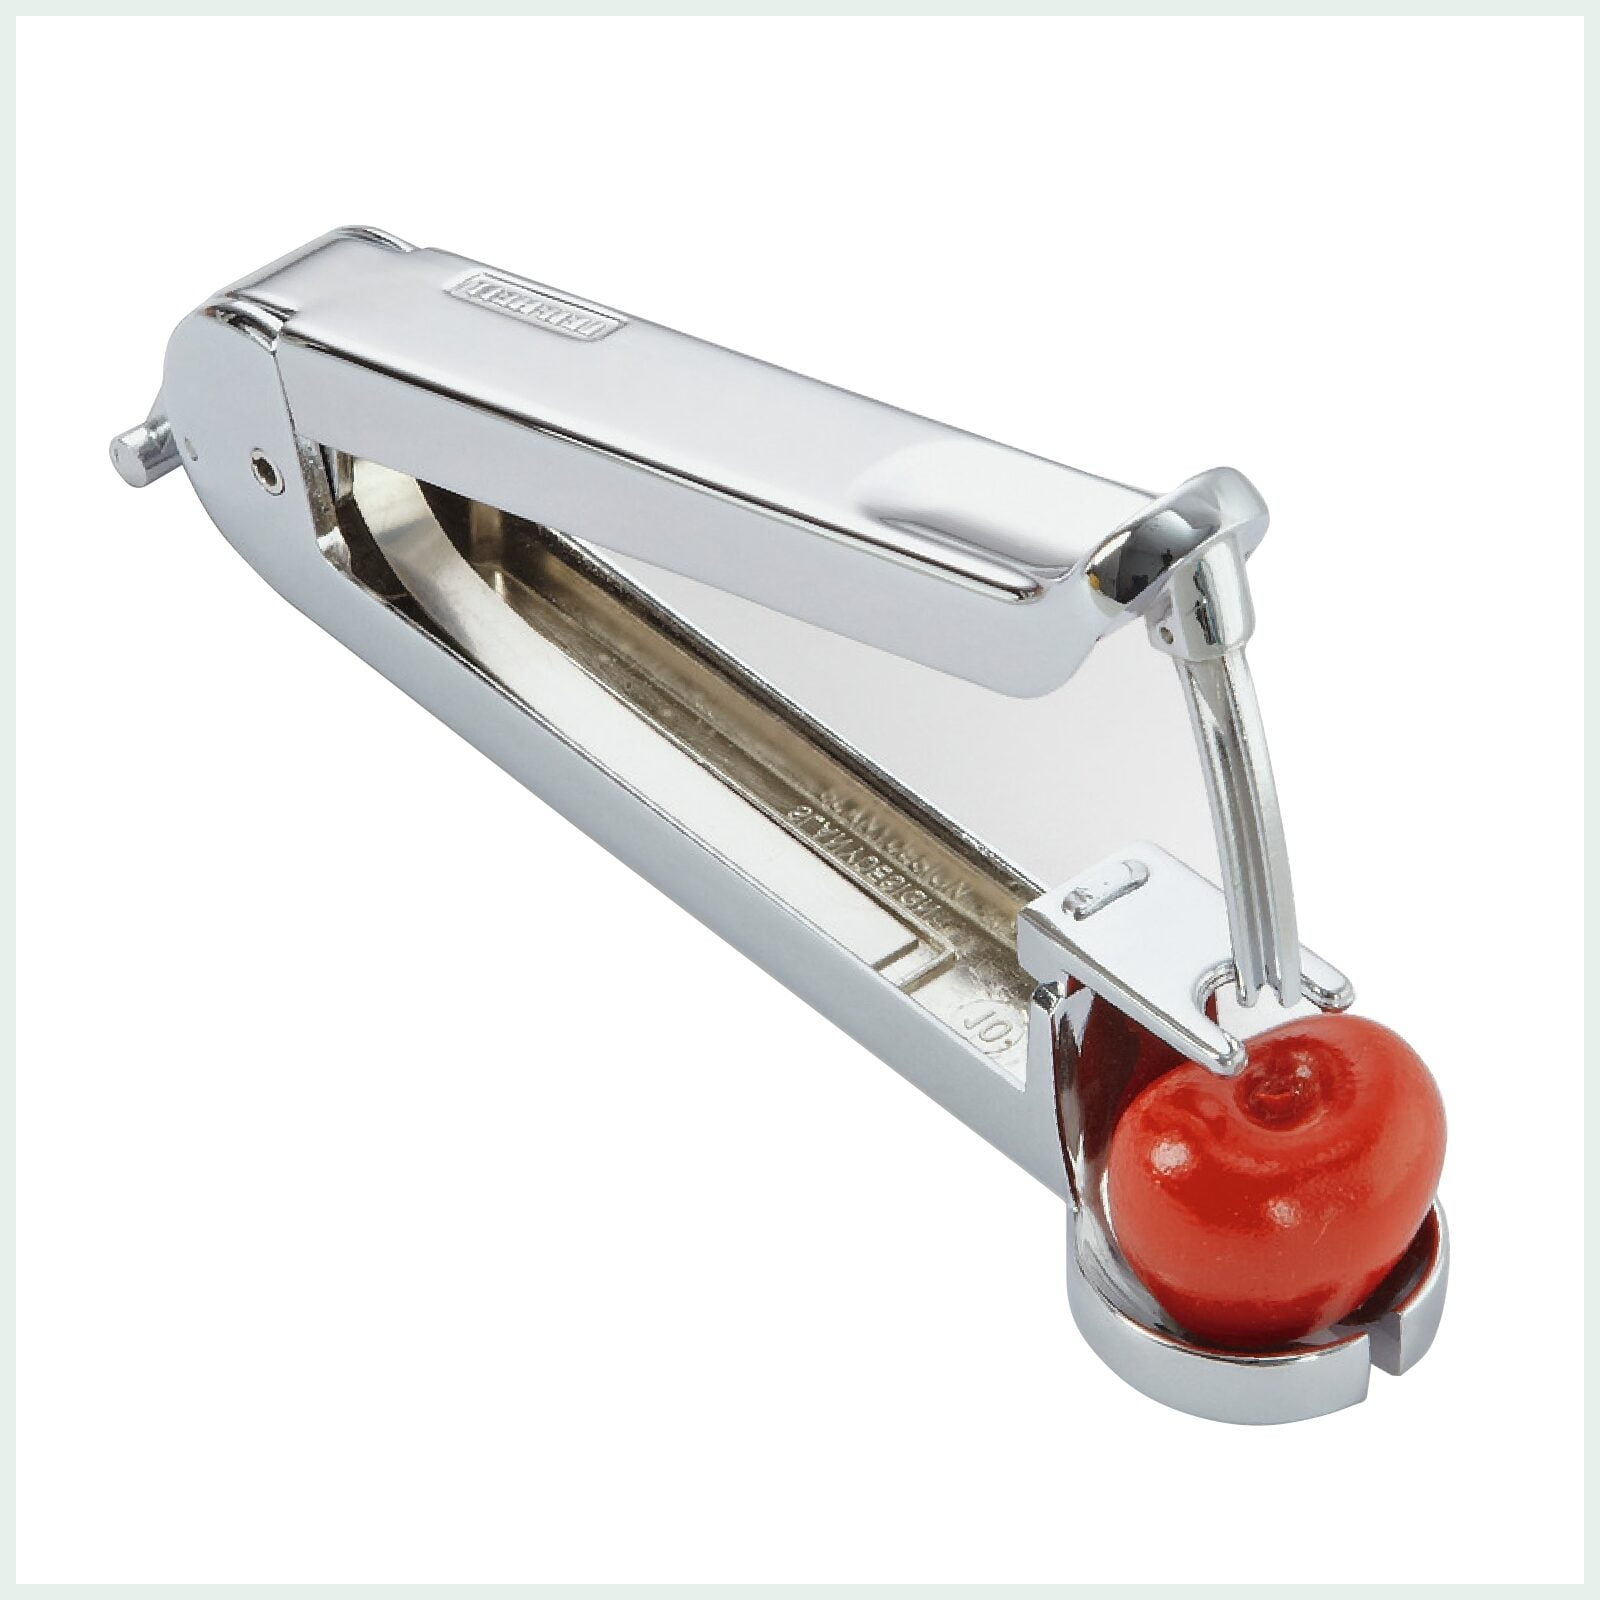 Leifheit Proline handheld cherry pitter and stone remover. Removes the pits of cherries and also olives.